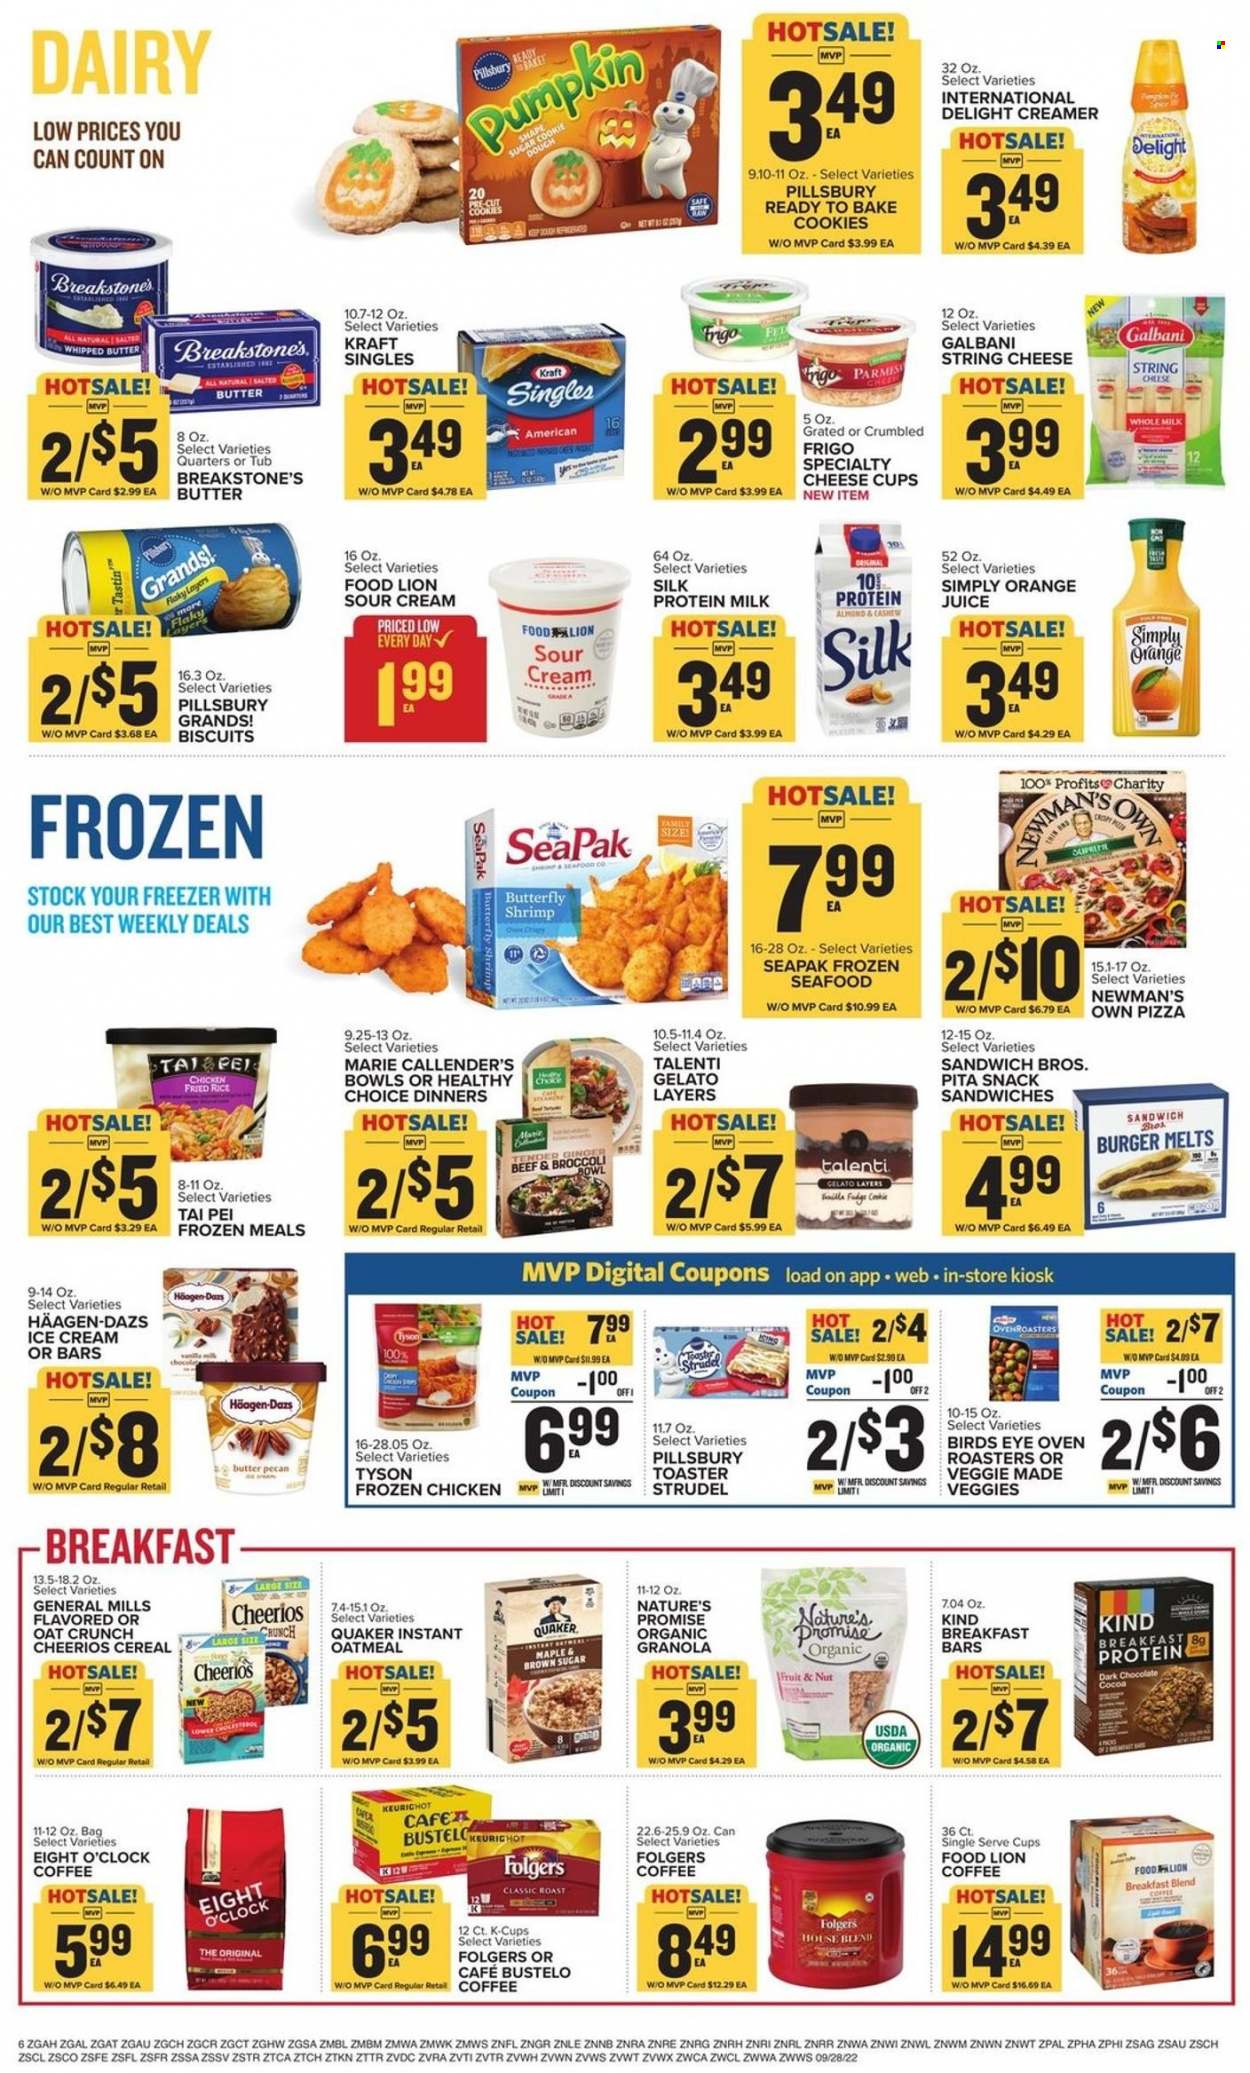 thumbnail - Food Lion Flyer - 09/28/2022 - 10/04/2022 - Sales products - pita, strudel, Nature’s Promise, seafood, shrimps, pizza, hamburger, Pillsbury, Bird's Eye, Quaker, Healthy Choice, Marie Callender's, Kraft®, sandwich slices, string cheese, cheese cup, Galbani, Kraft Singles, milk, Silk, whipped butter, sour cream, creamer, ice cream, Häagen-Dazs, Talenti Gelato, gelato, cookies, fudge, snack, biscuit, dark chocolate, cocoa, oatmeal, cereals, granola, Cheerios, orange juice, juice, coffee, Folgers, coffee capsules, K-Cups, Eight O'Clock, breakfast blend, bowl. Page 6.